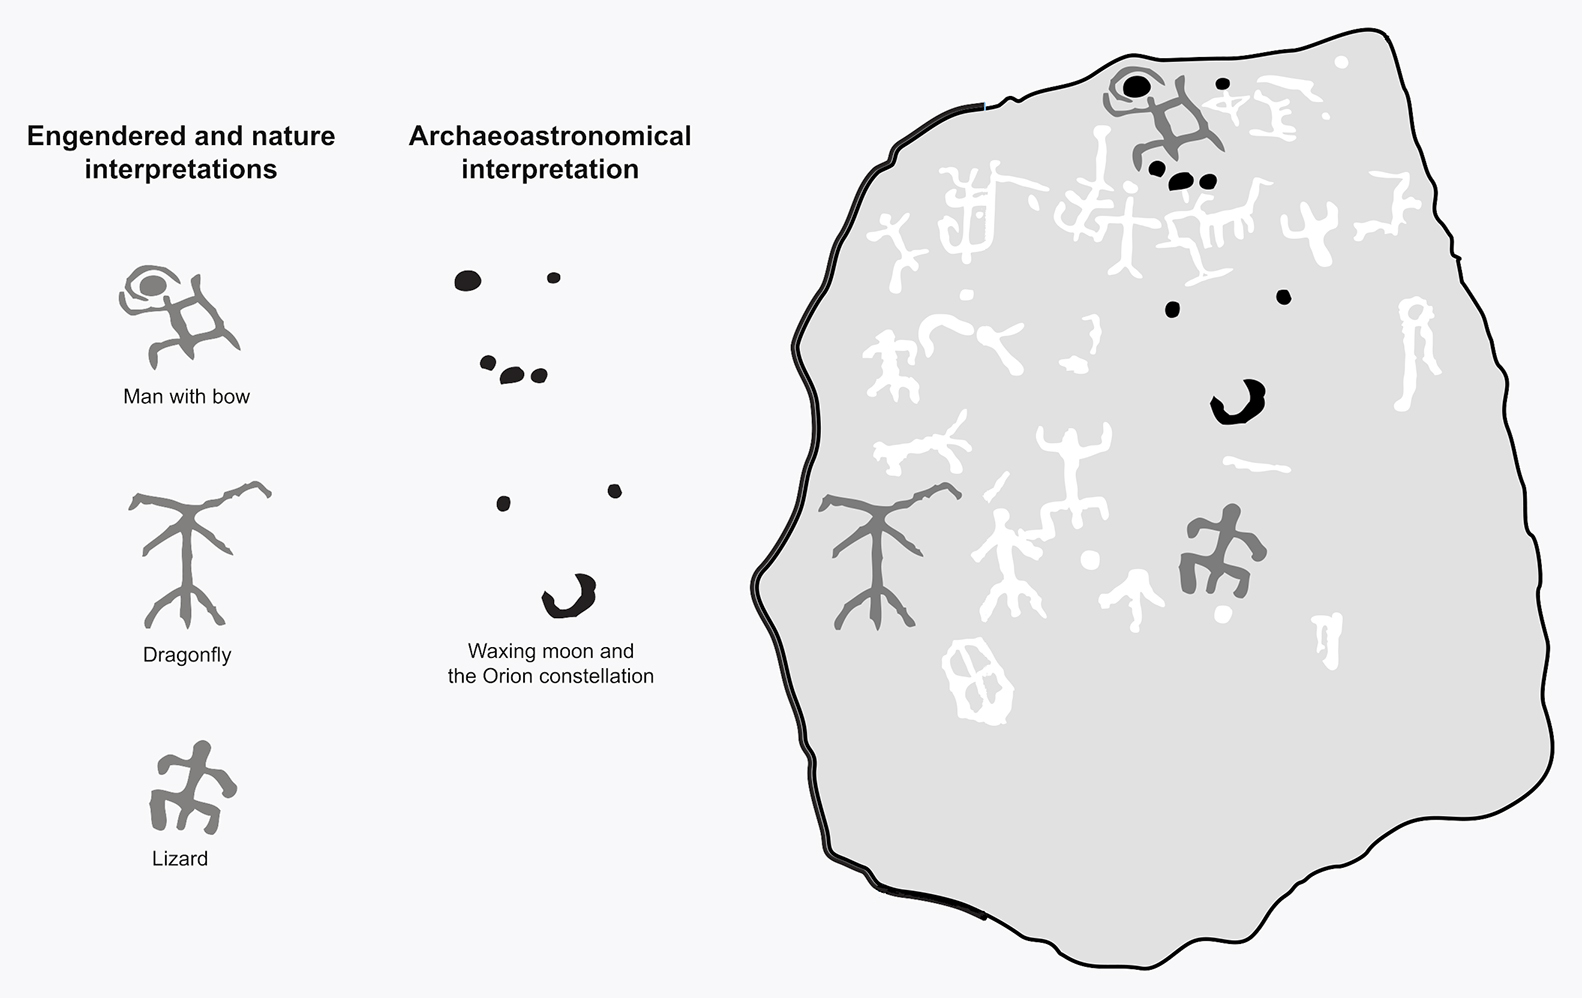 Diagram of the meaning of some of the imagery on the petroglyph